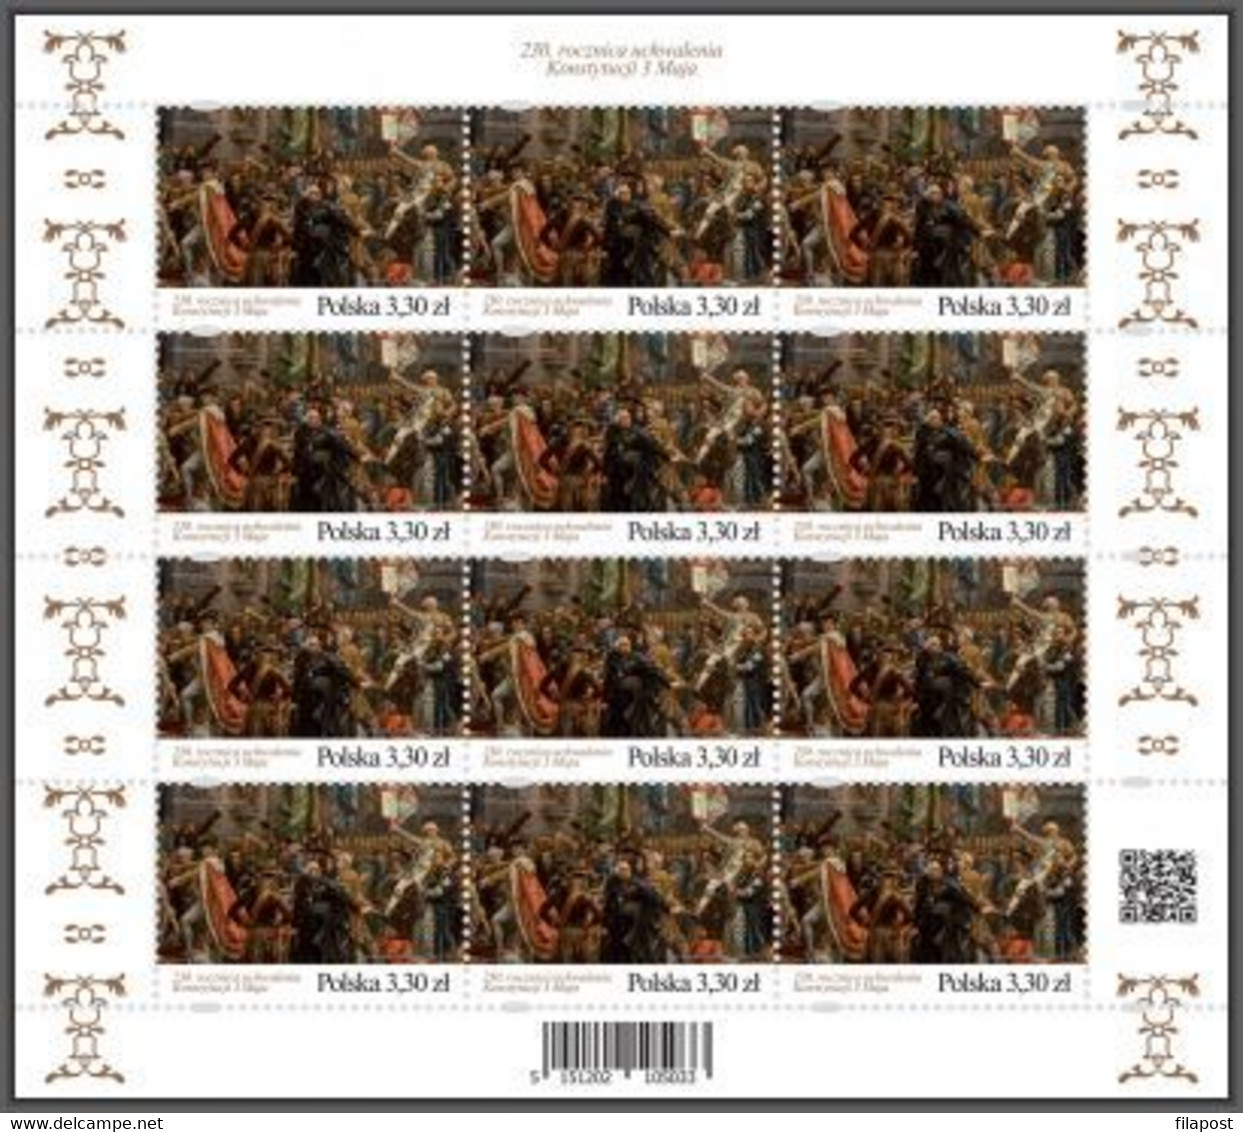 Poland 2021 / 230th Anniversary Of The 3rd Of May Constitution, Jan Matejko Work, Art, Royal Castle Warsaw /MNH** New!!! - Hojas Completas